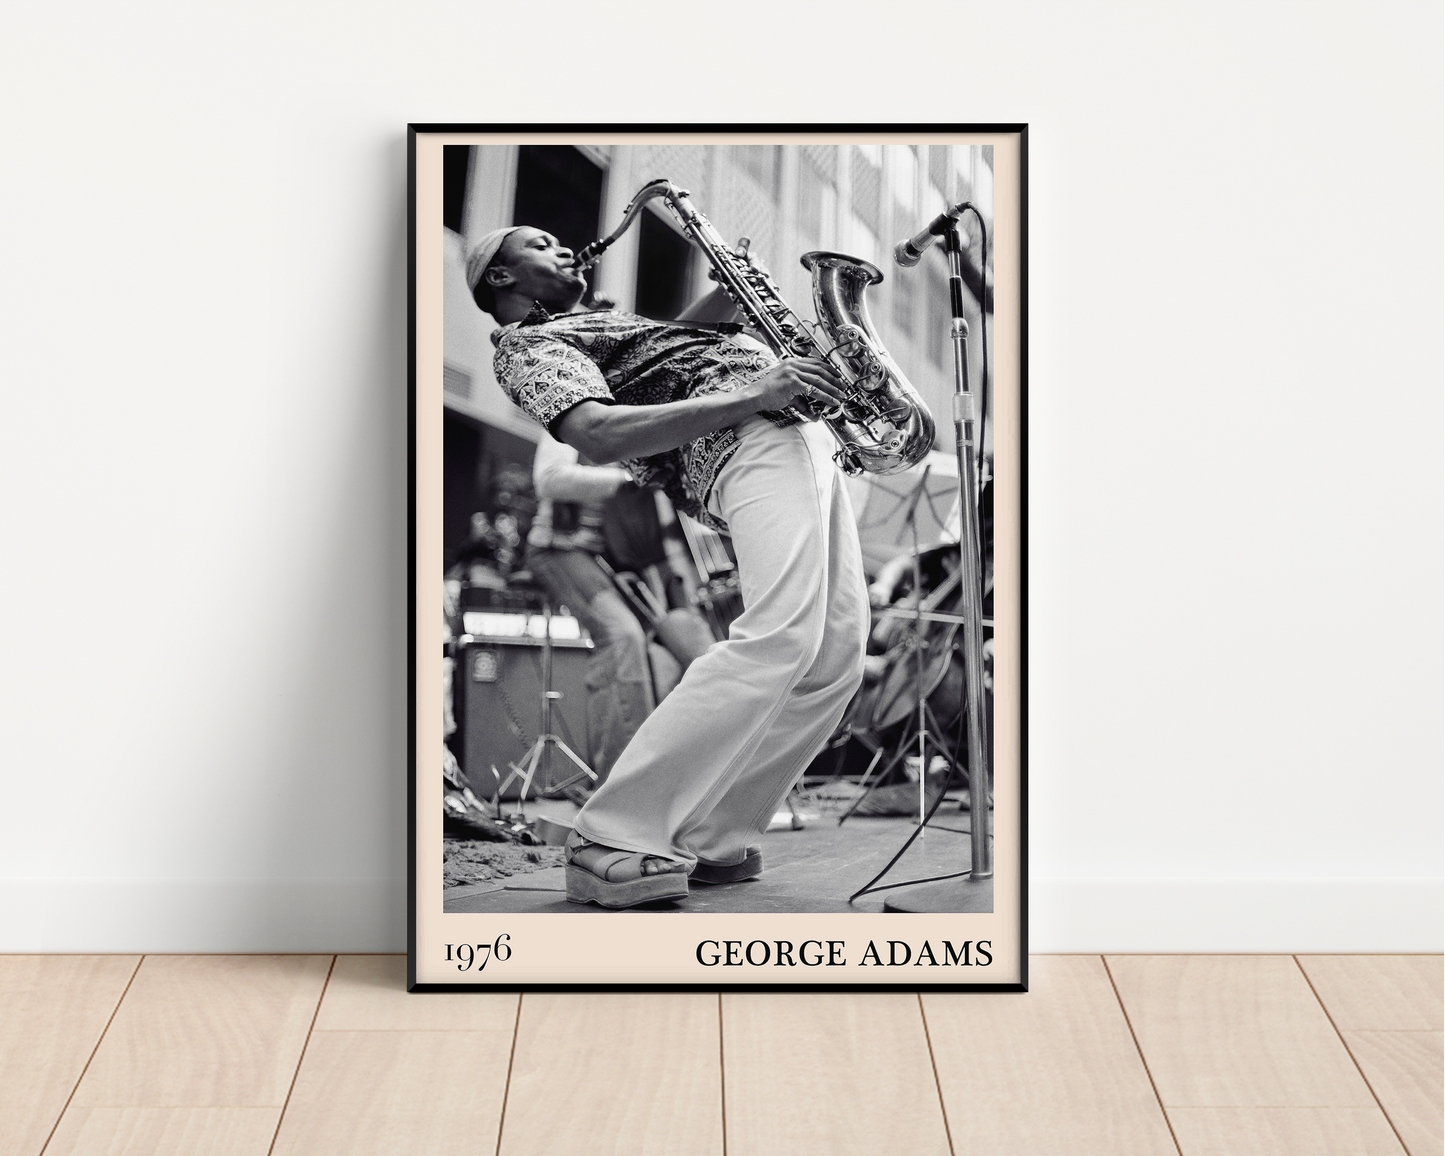 1976 photograph of George Adams taken by Thomas Marcello. Picture crafted into a black framed poster, with an off-white border. Poster is propped against a white wall